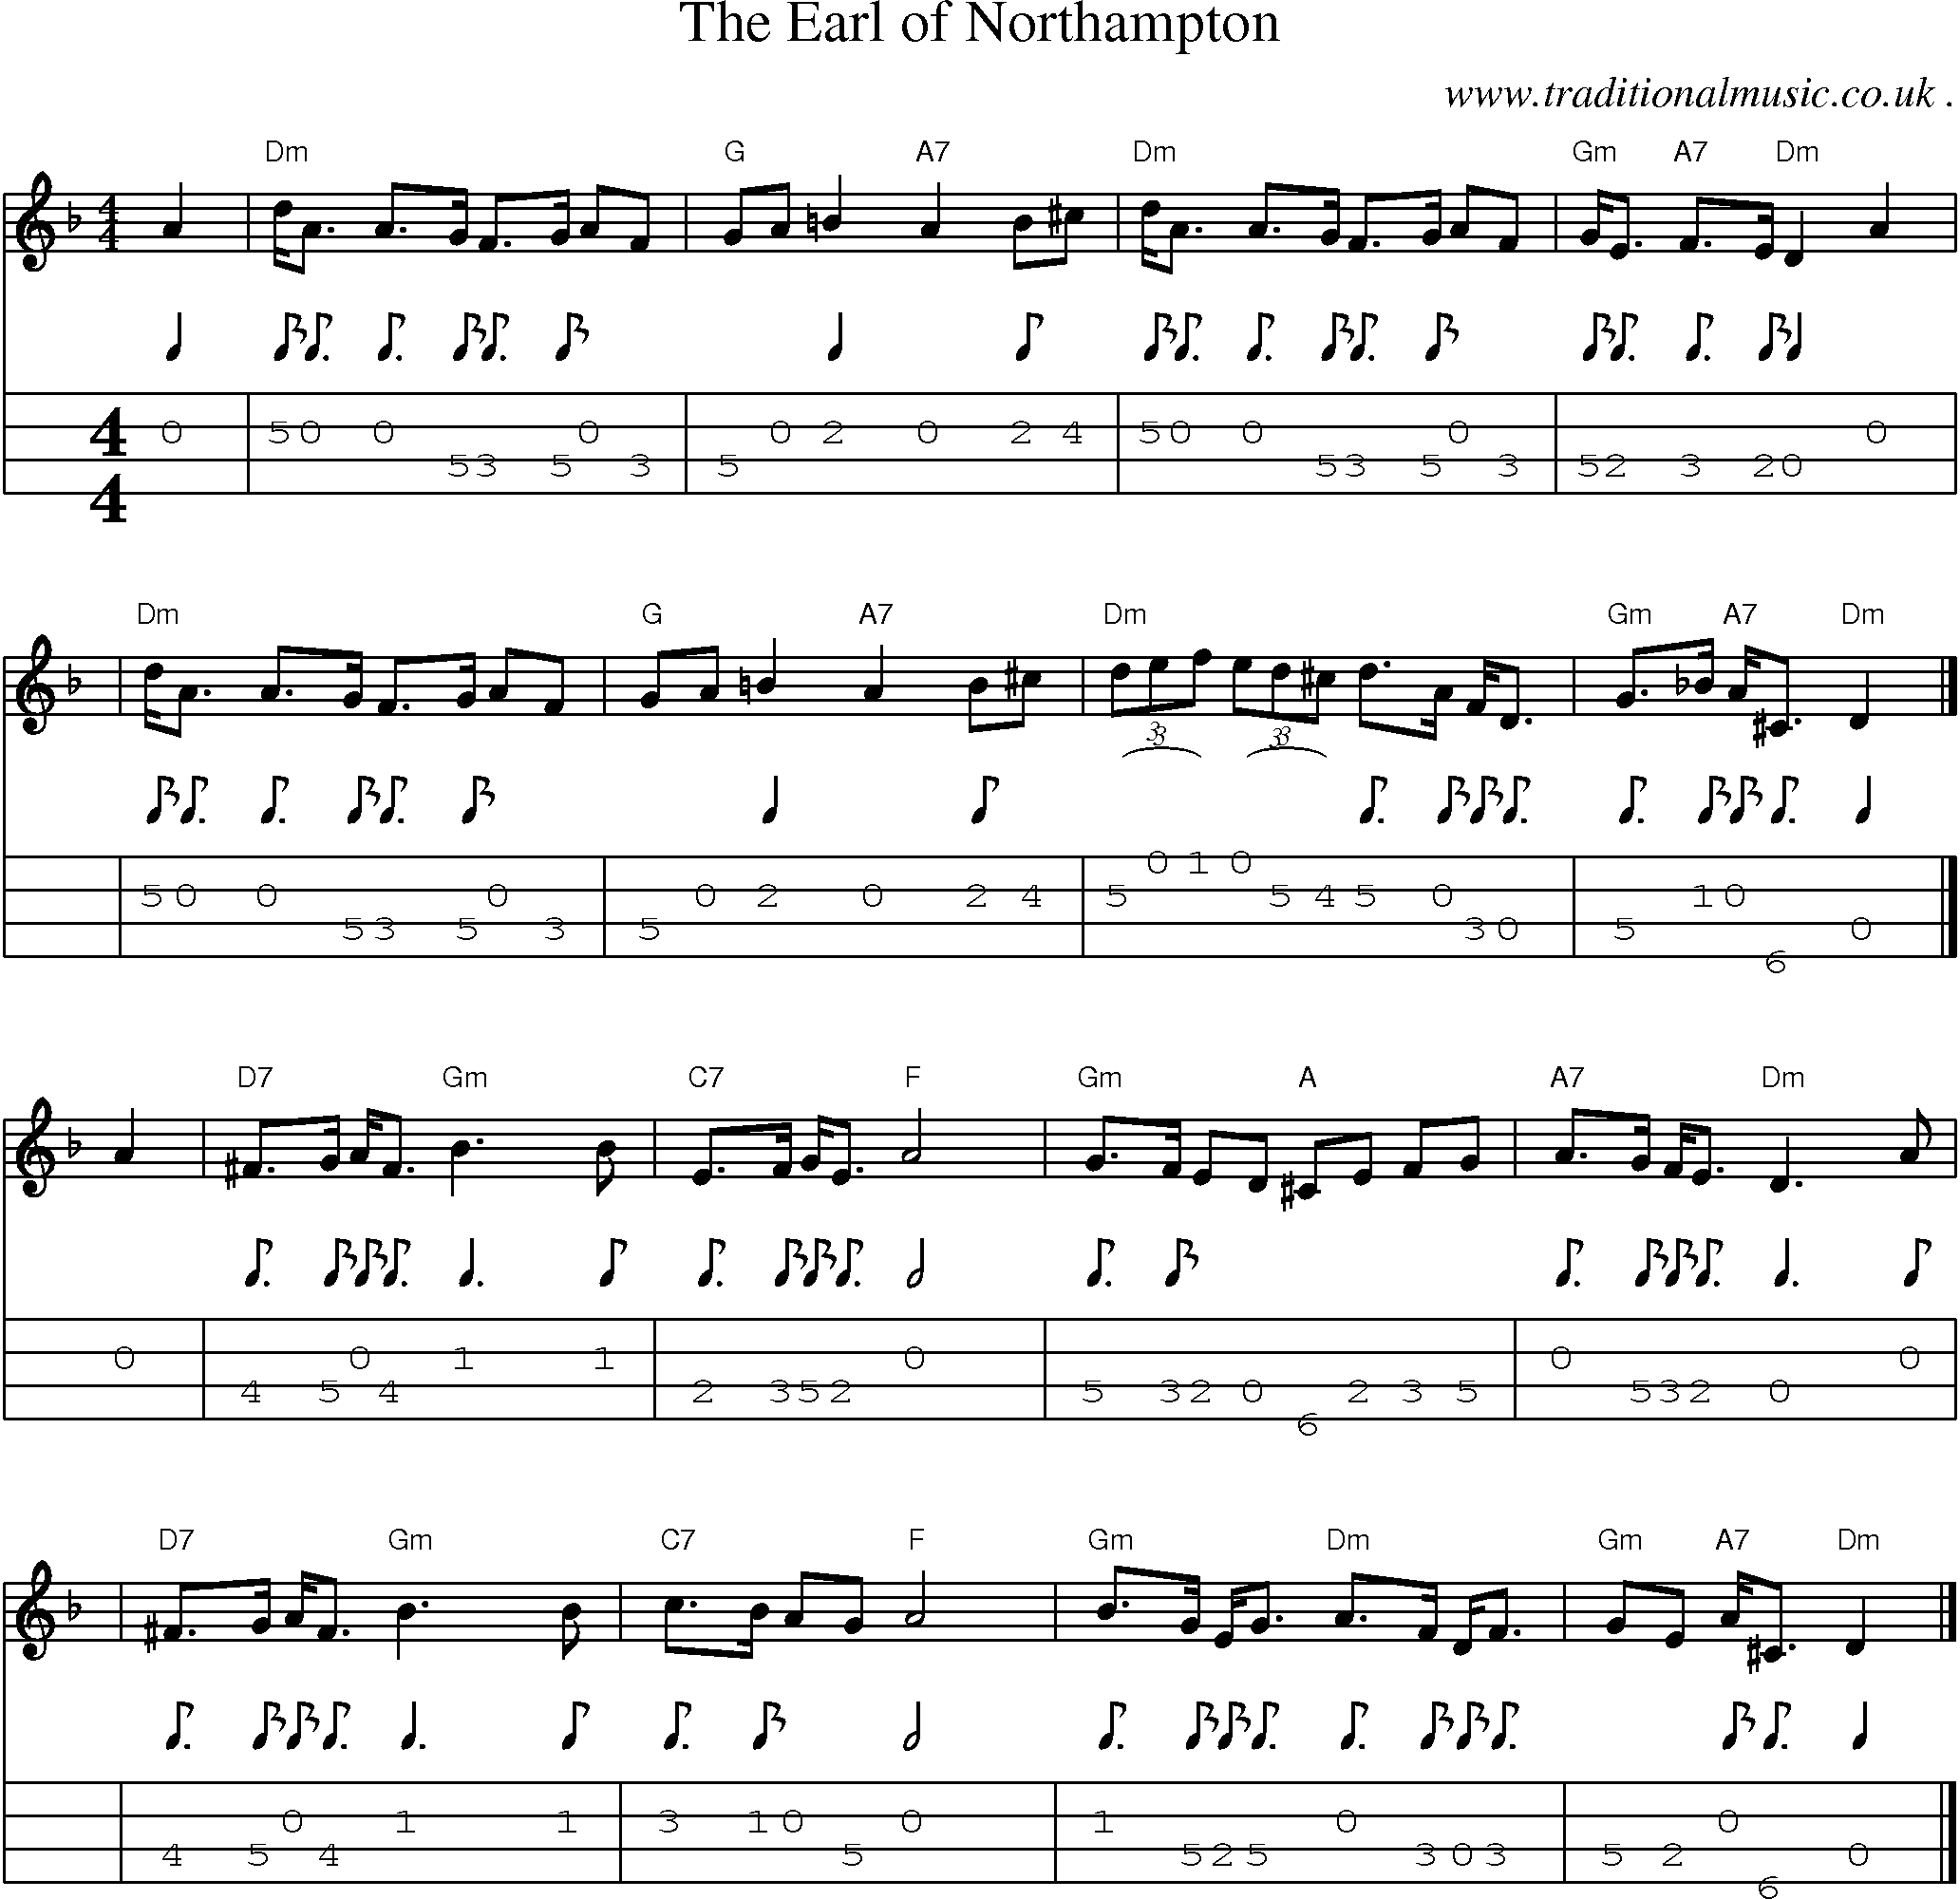 Sheet-music  score, Chords and Mandolin Tabs for The Earl Of Northampton